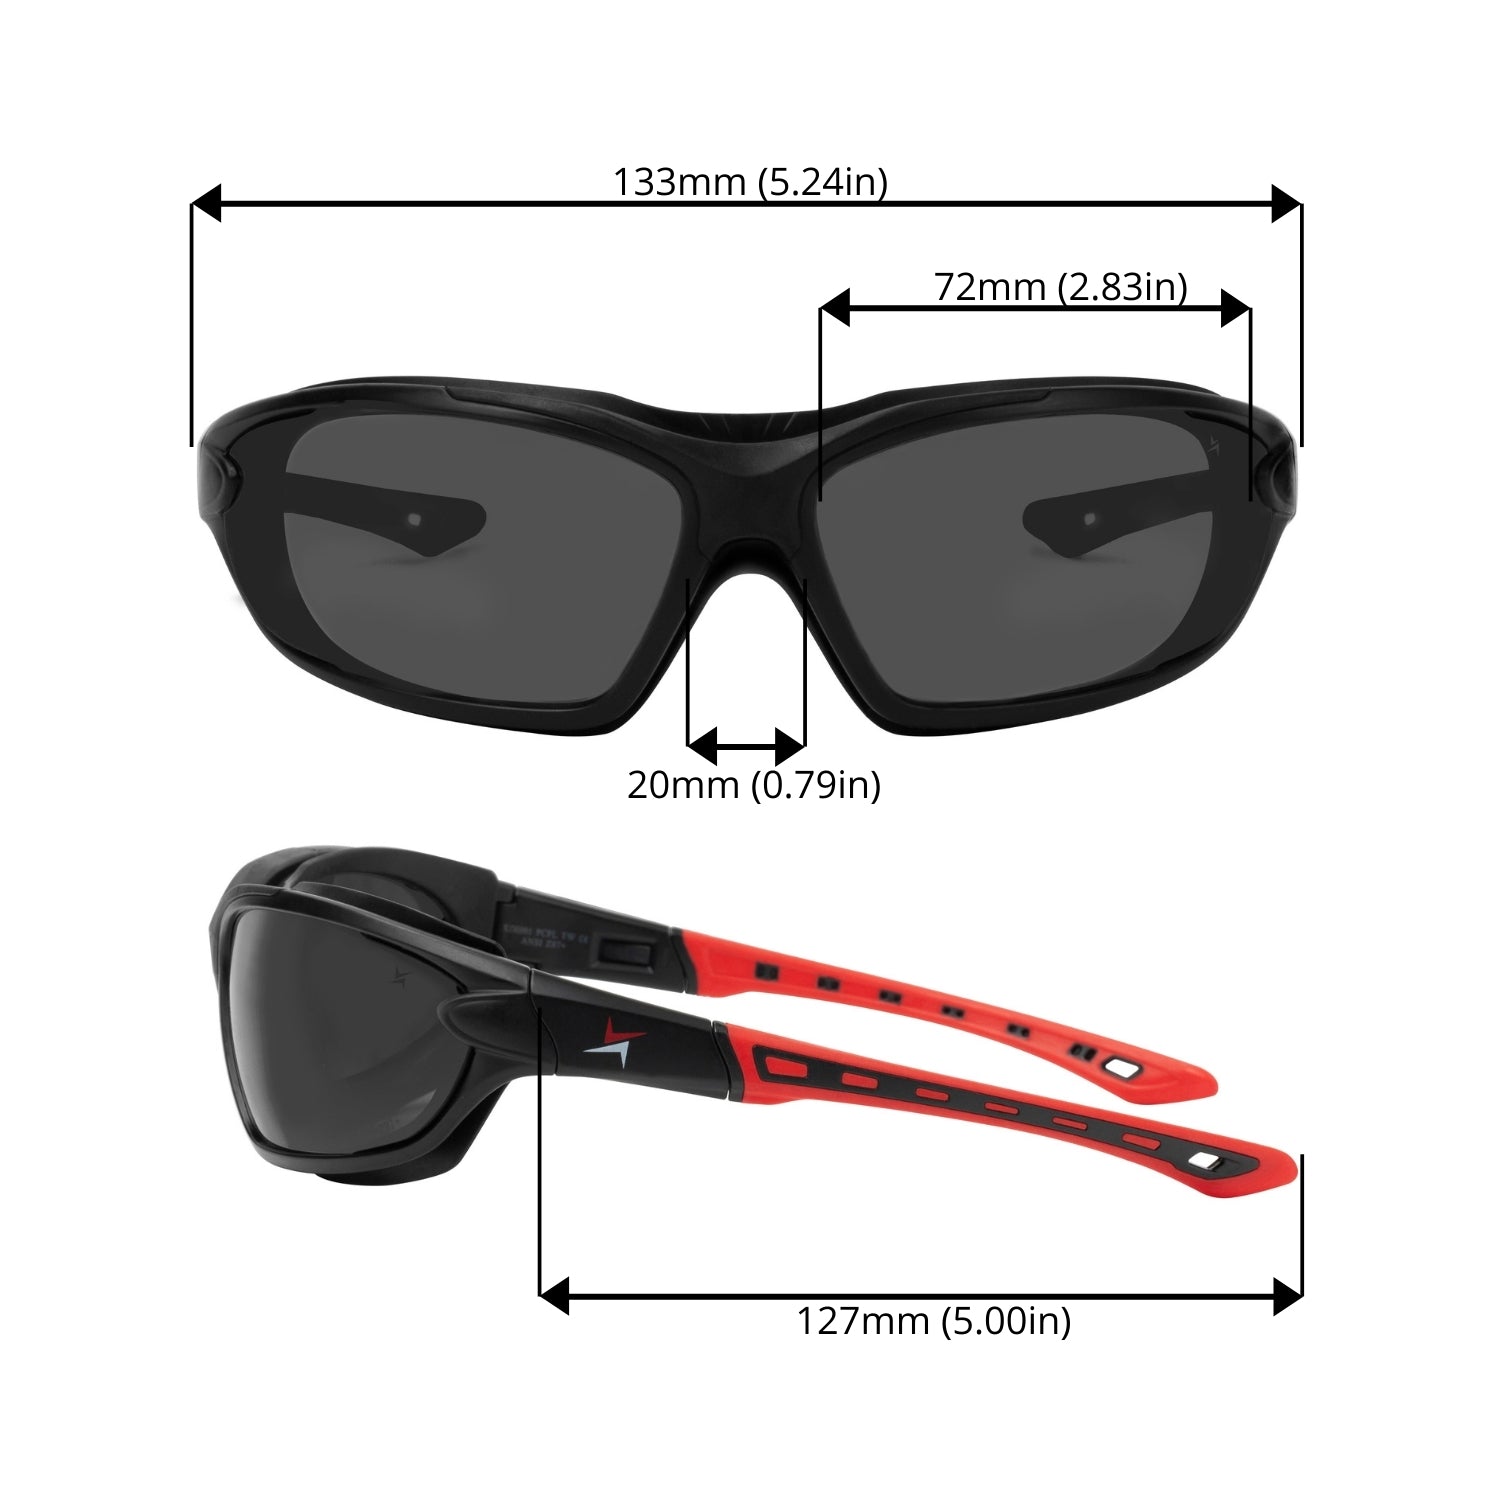 Dark Smoke Lens Sport Safety Sunglasses with Swappable Strap and Gasketed Goggle Padding.